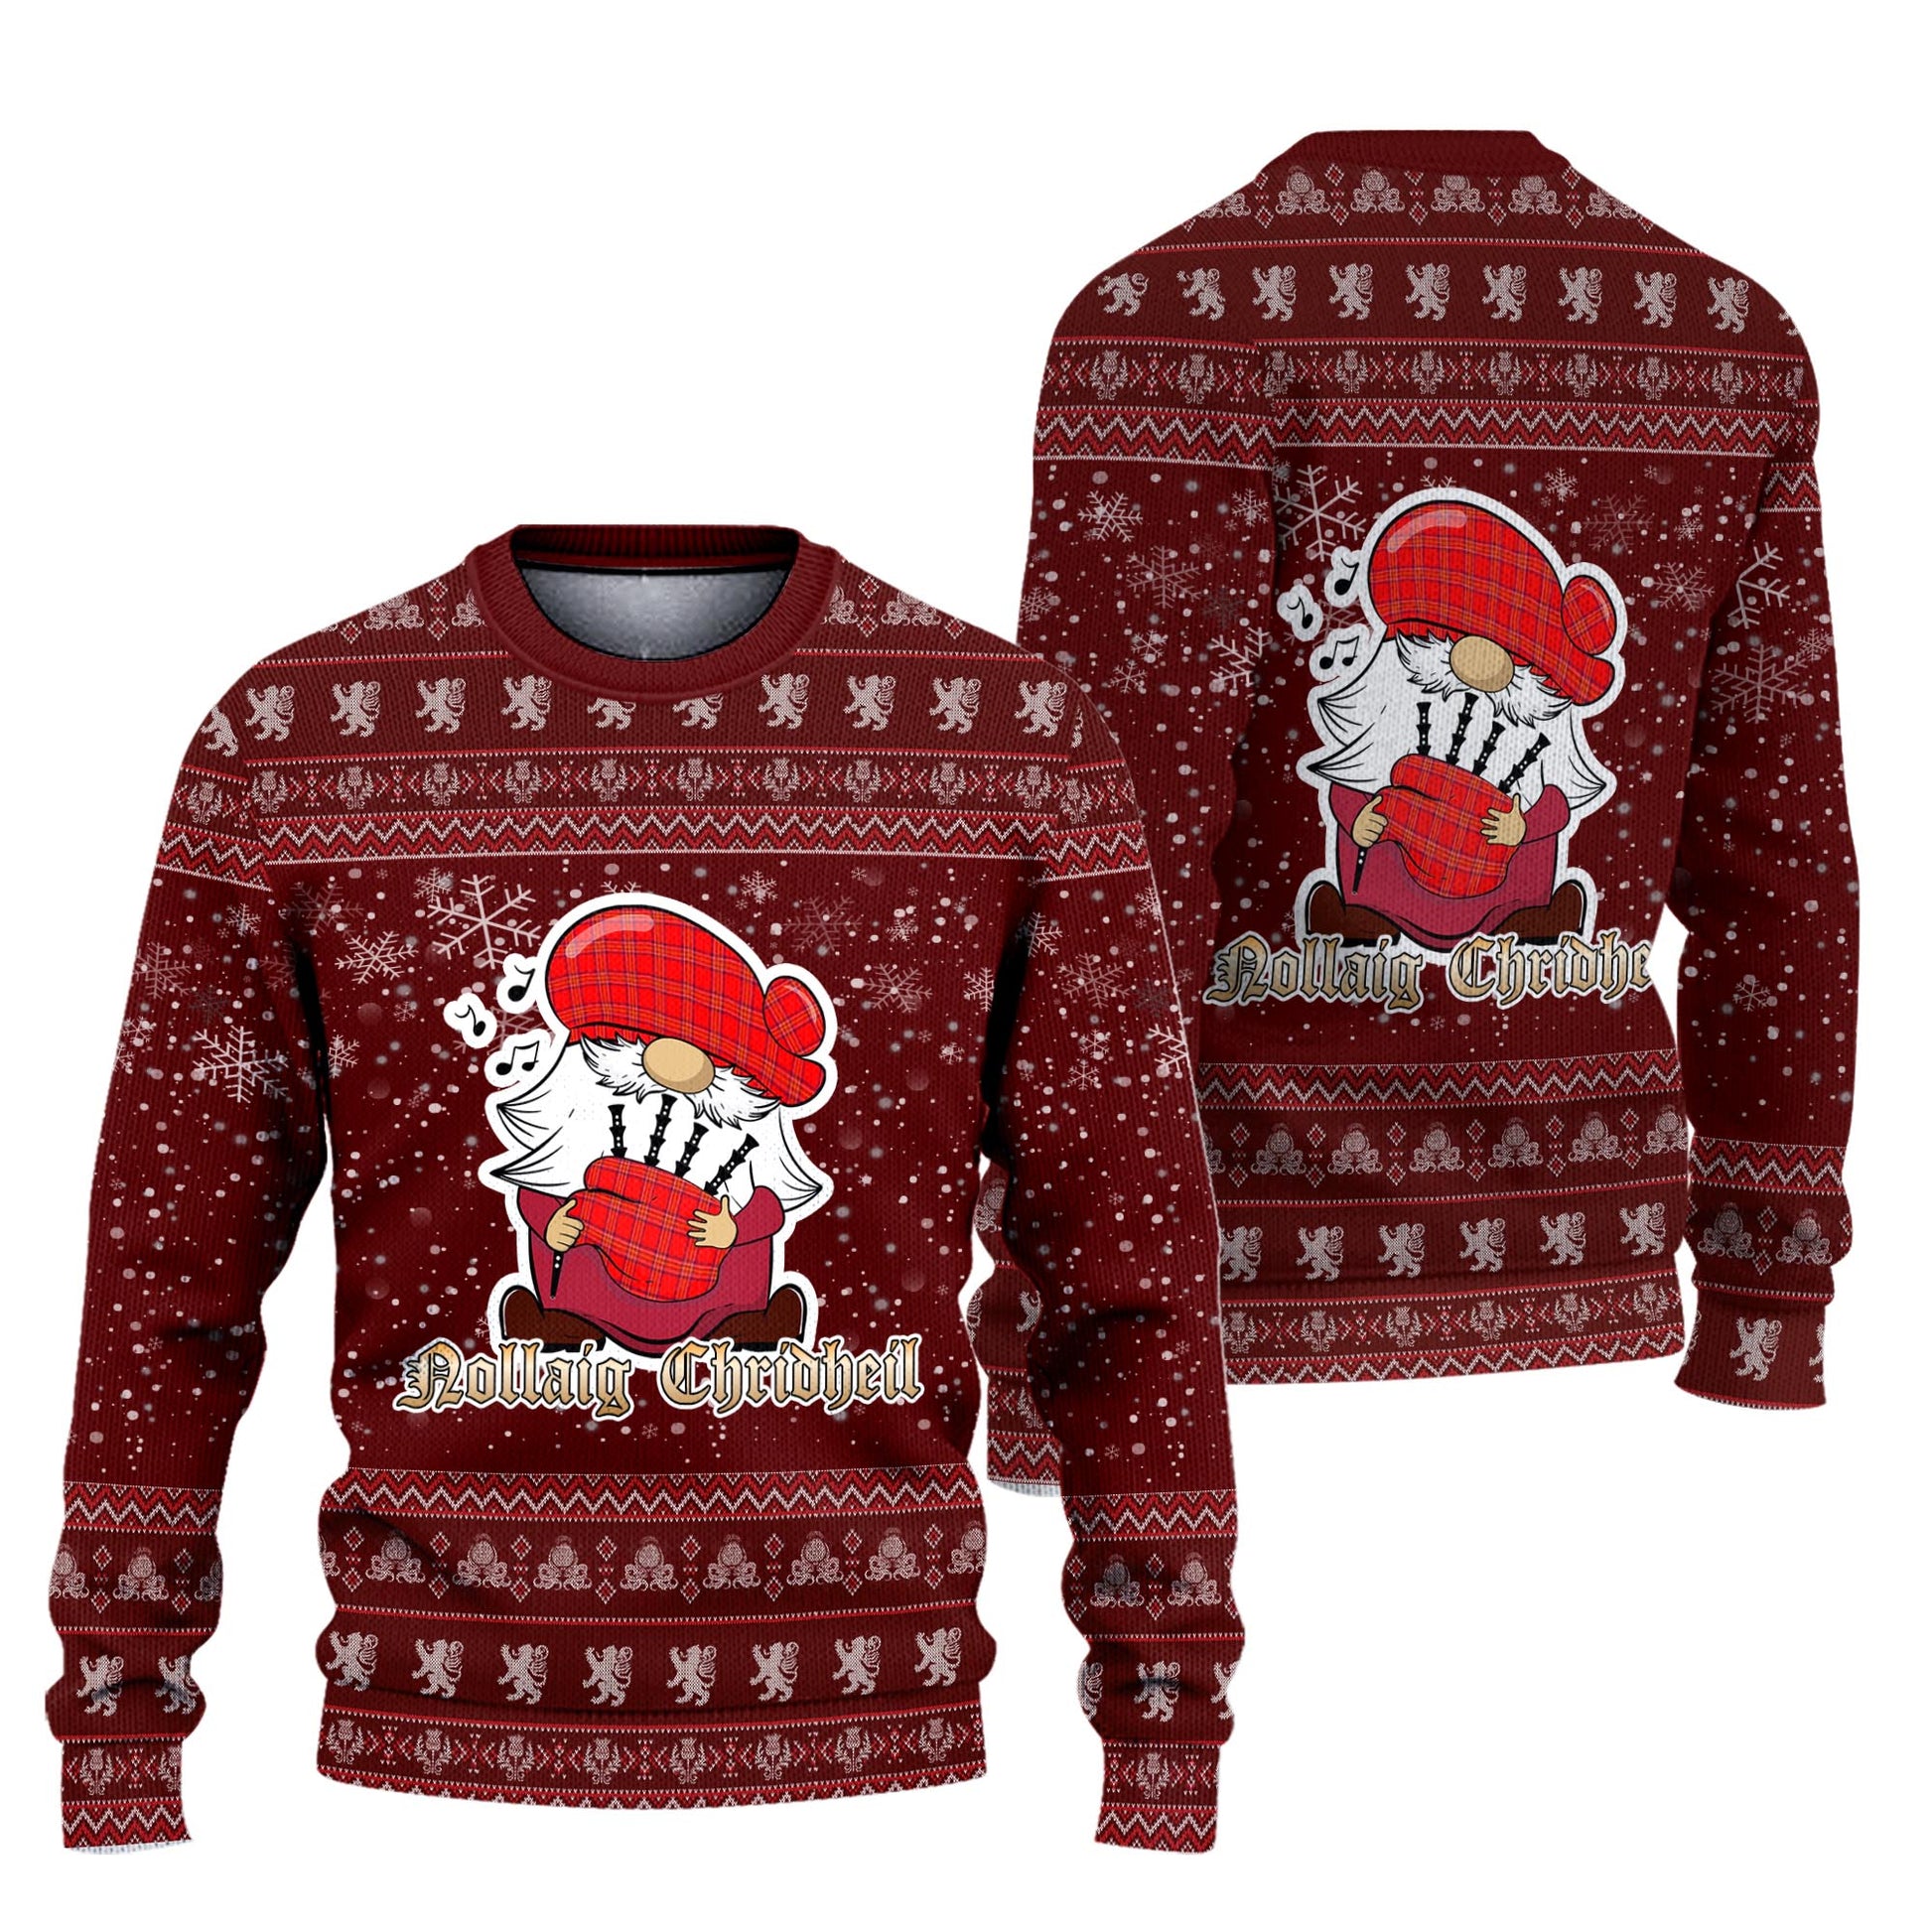 Burnett Modern Clan Christmas Family Knitted Sweater with Funny Gnome Playing Bagpipes Unisex Red - Tartanvibesclothing